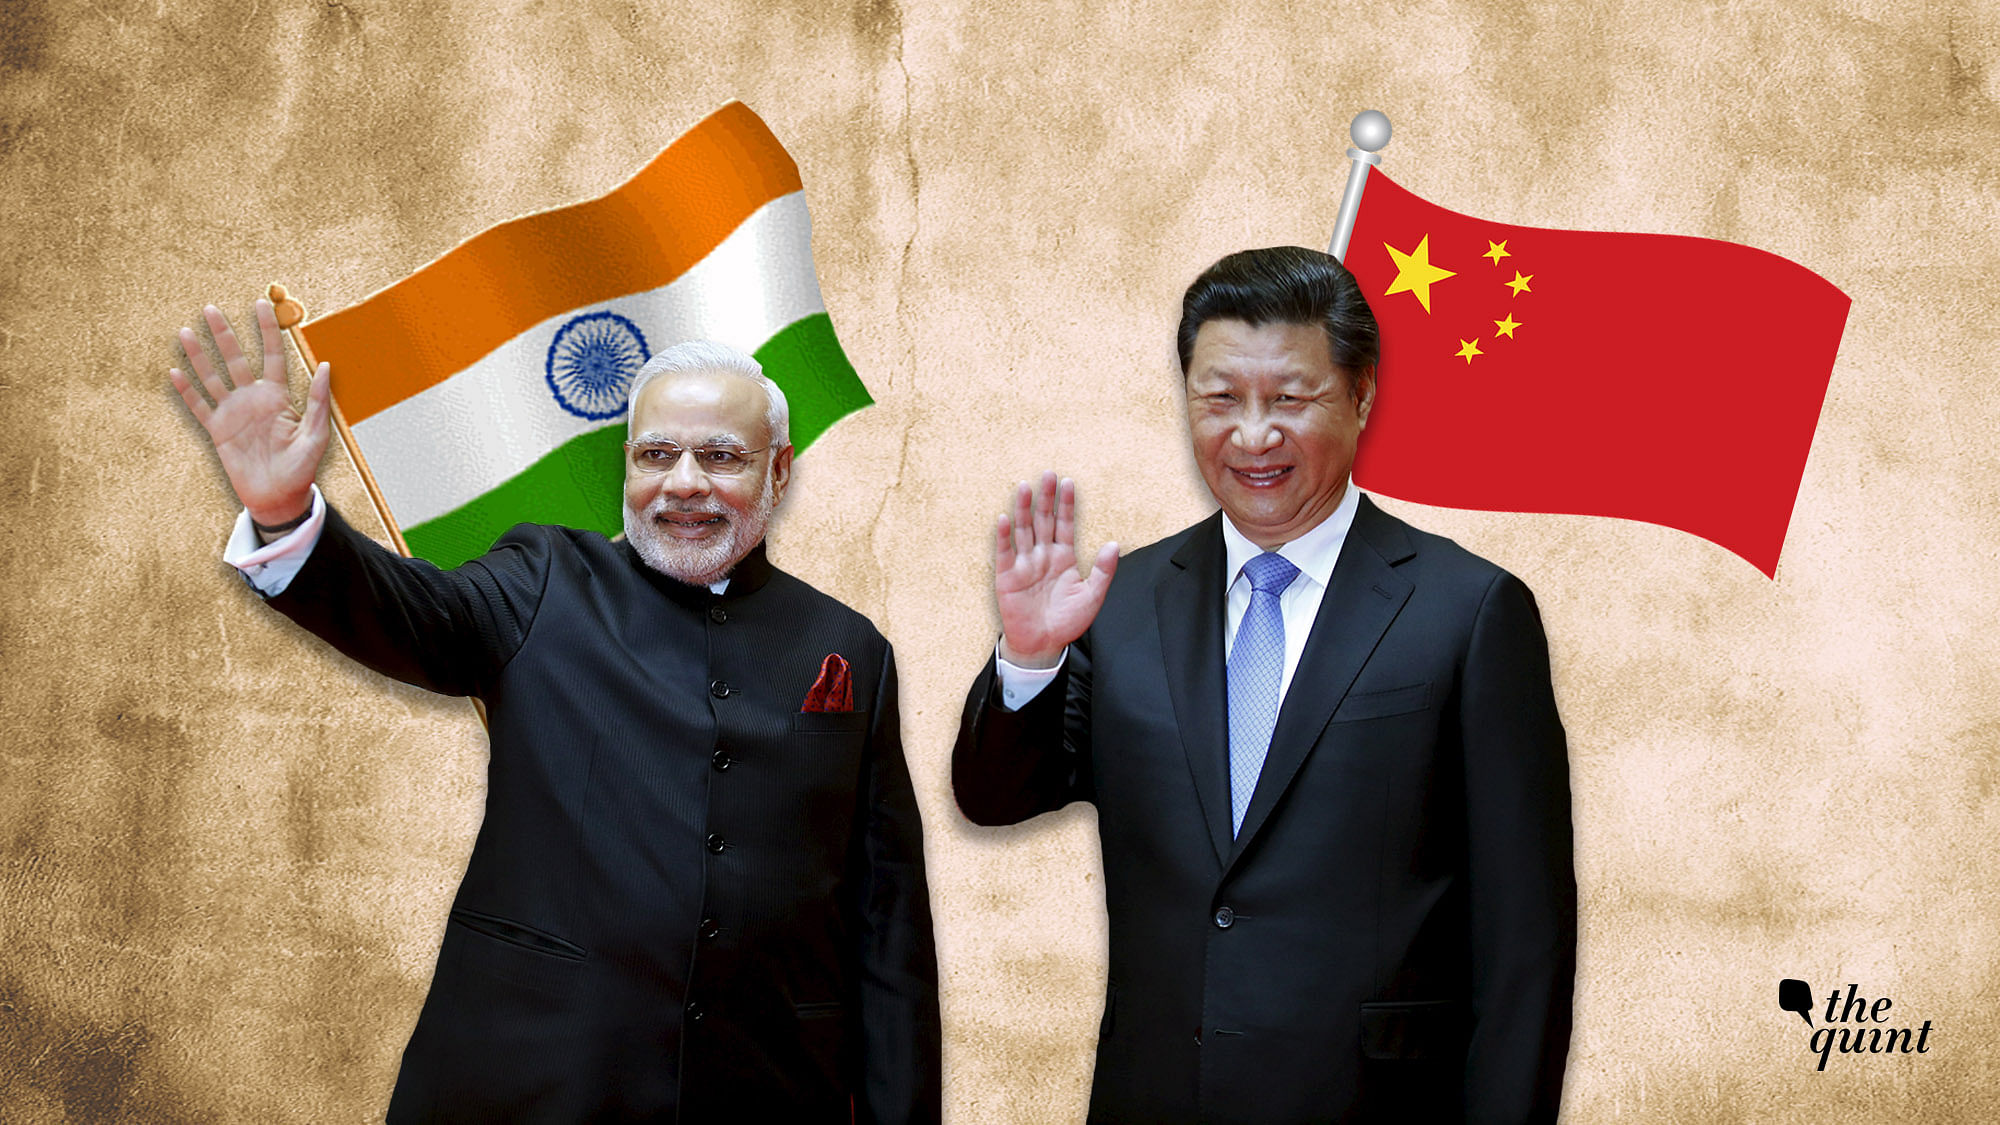 Archival image of PM Modi and Chinese President Xi Jinping, used for representational purposes.